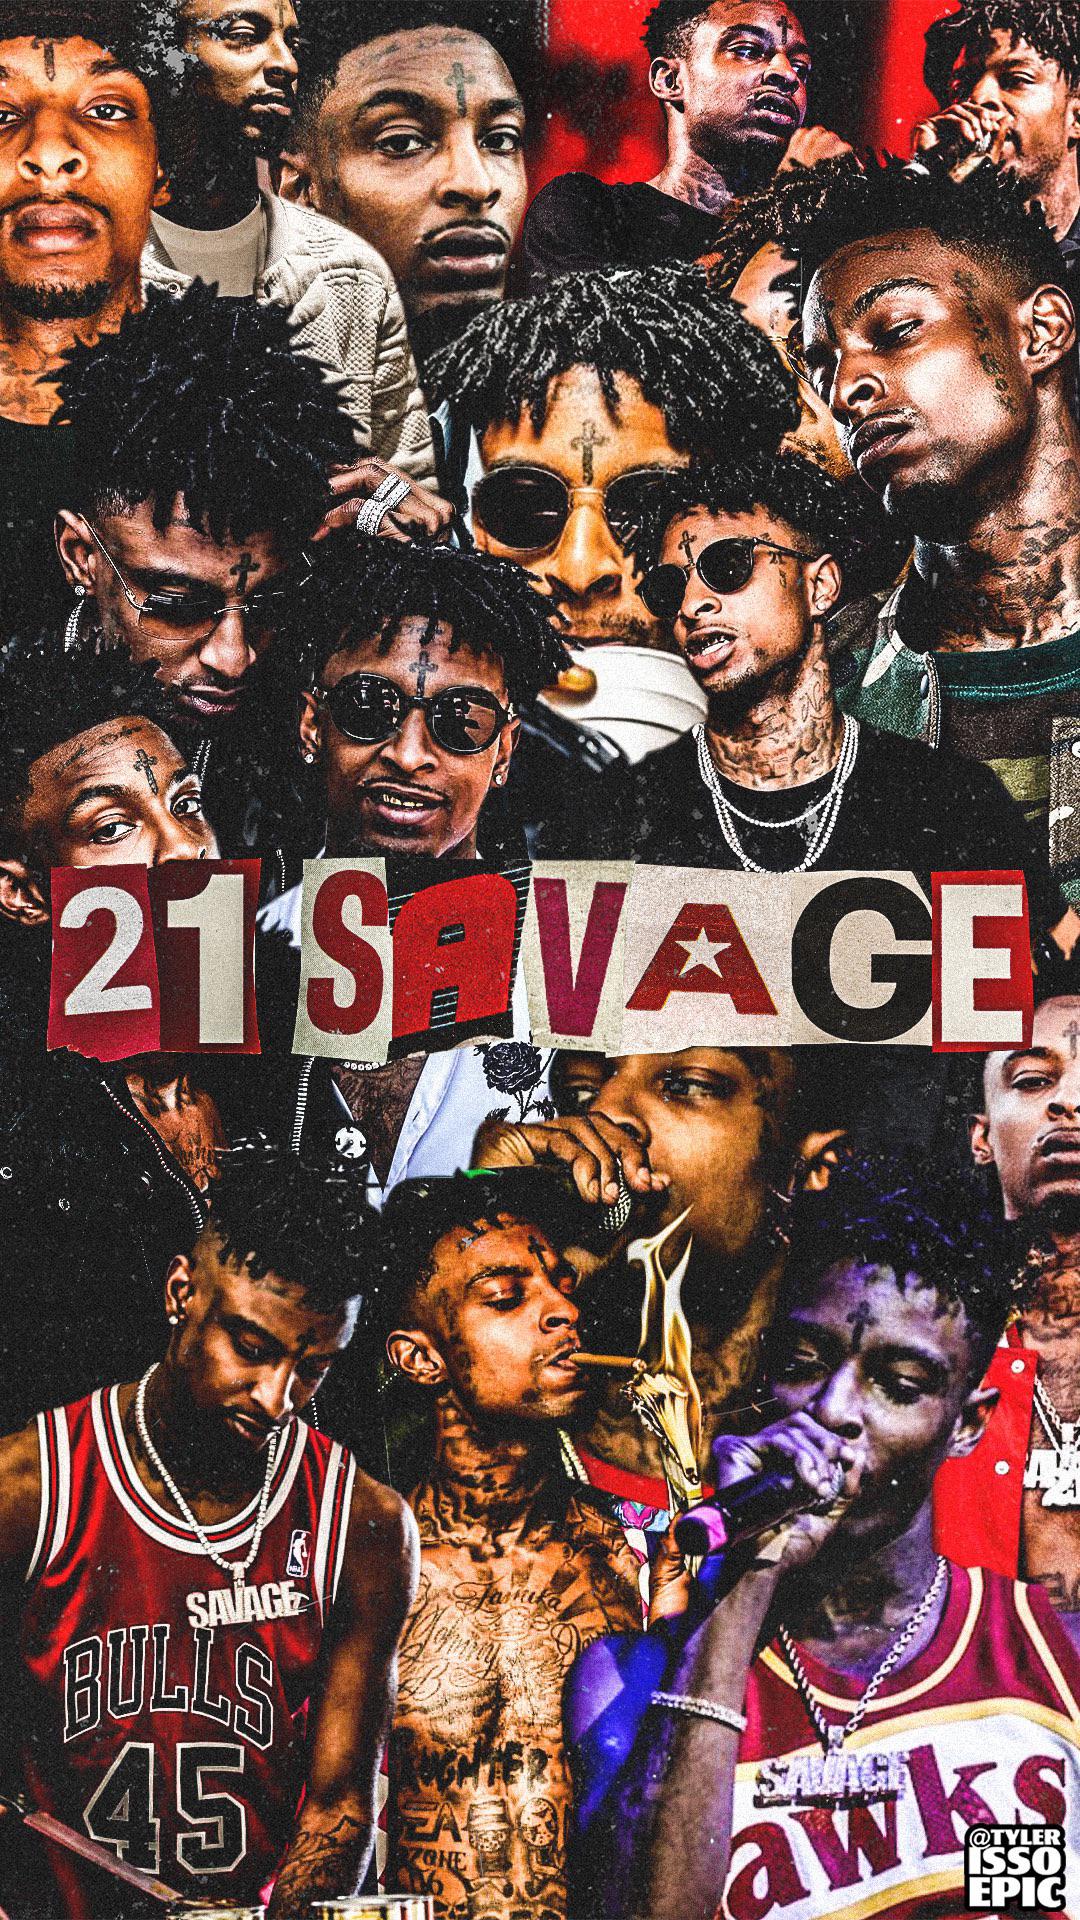 Fire 21 Savage Wallpaper Made On Instagram